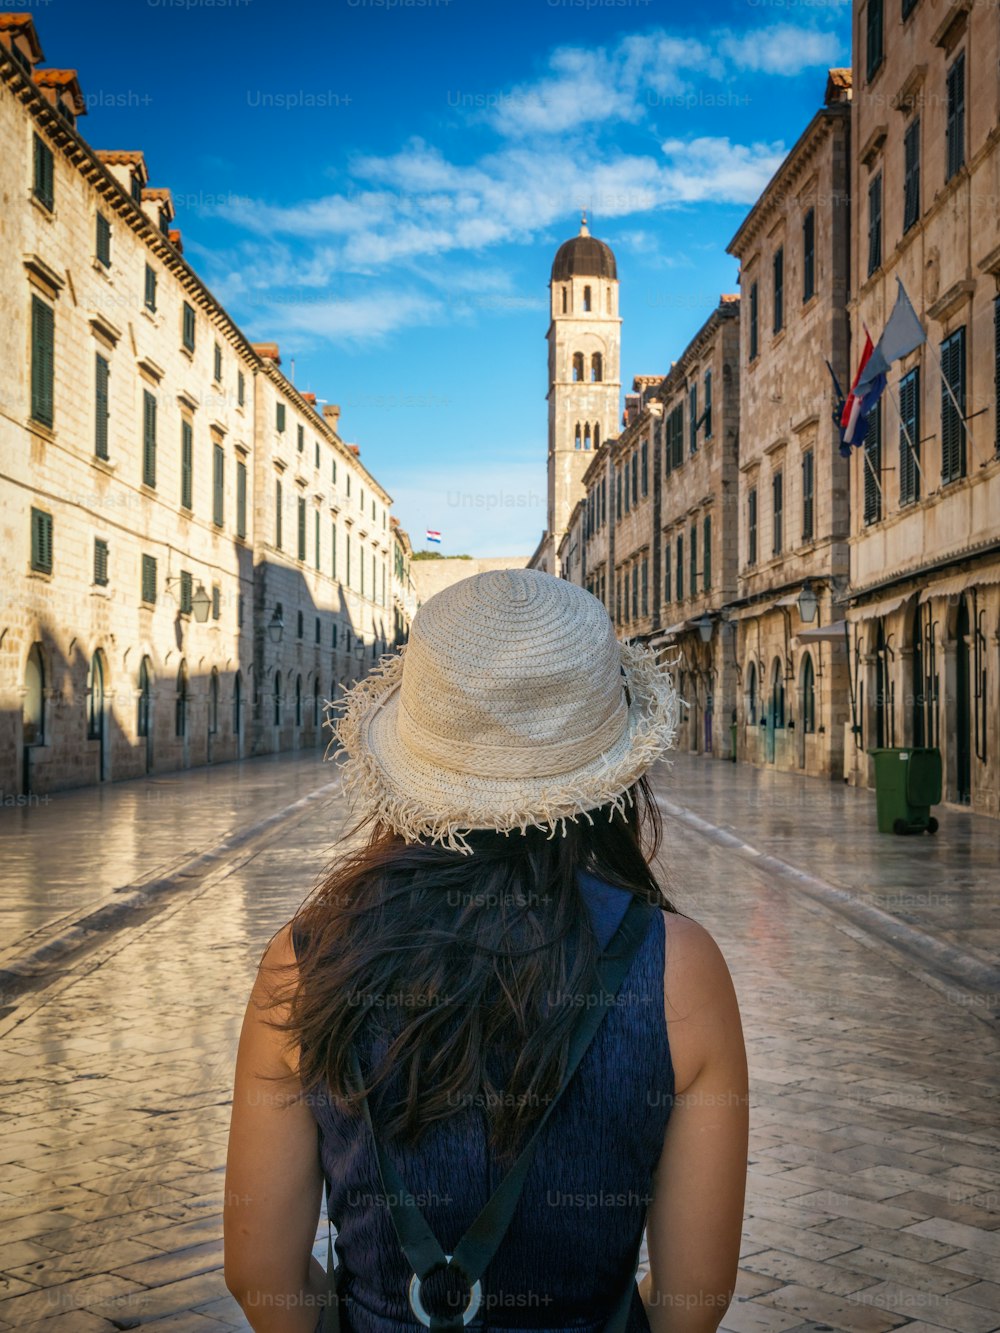 Traveler walks on the historic street of Stradun (Placa) in old town of Dubrovnik in Croatia - Prominent travel destination of Croatia. Dubrovnik old town was listed as UNESCO World Heritage in 1979.